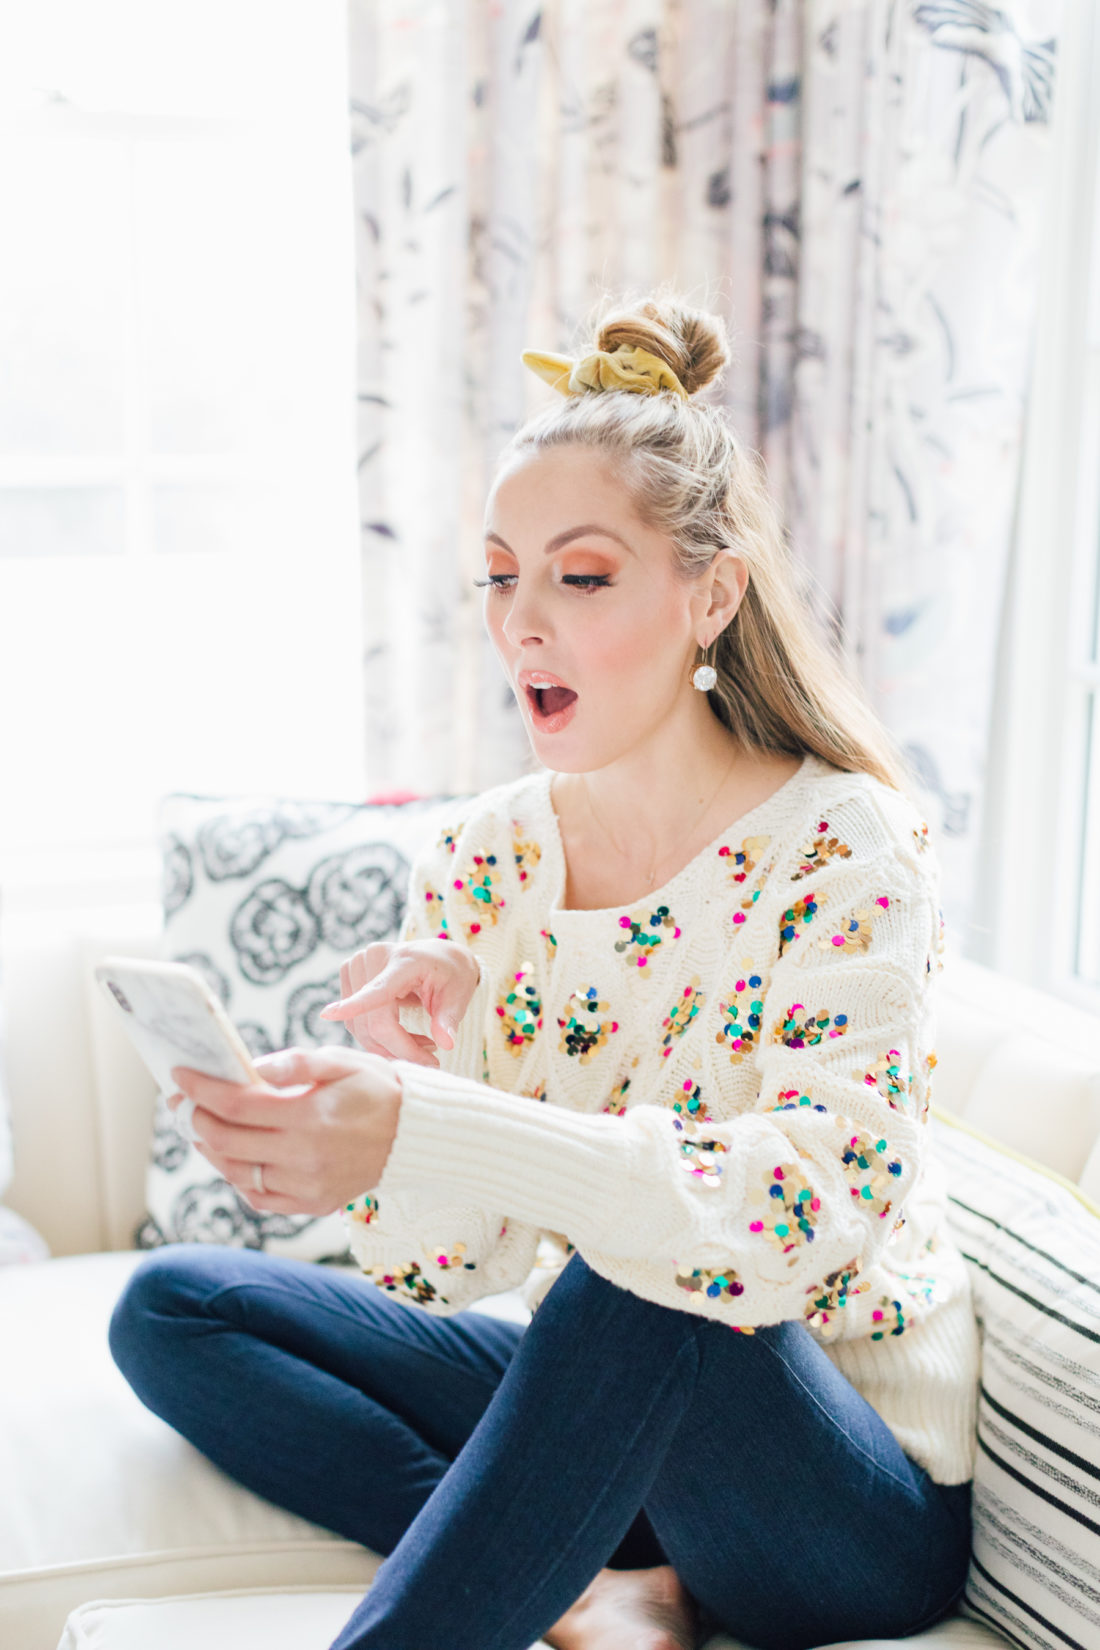 Eva Amurri Martino shares some must-know iPhone tips for Mom's!